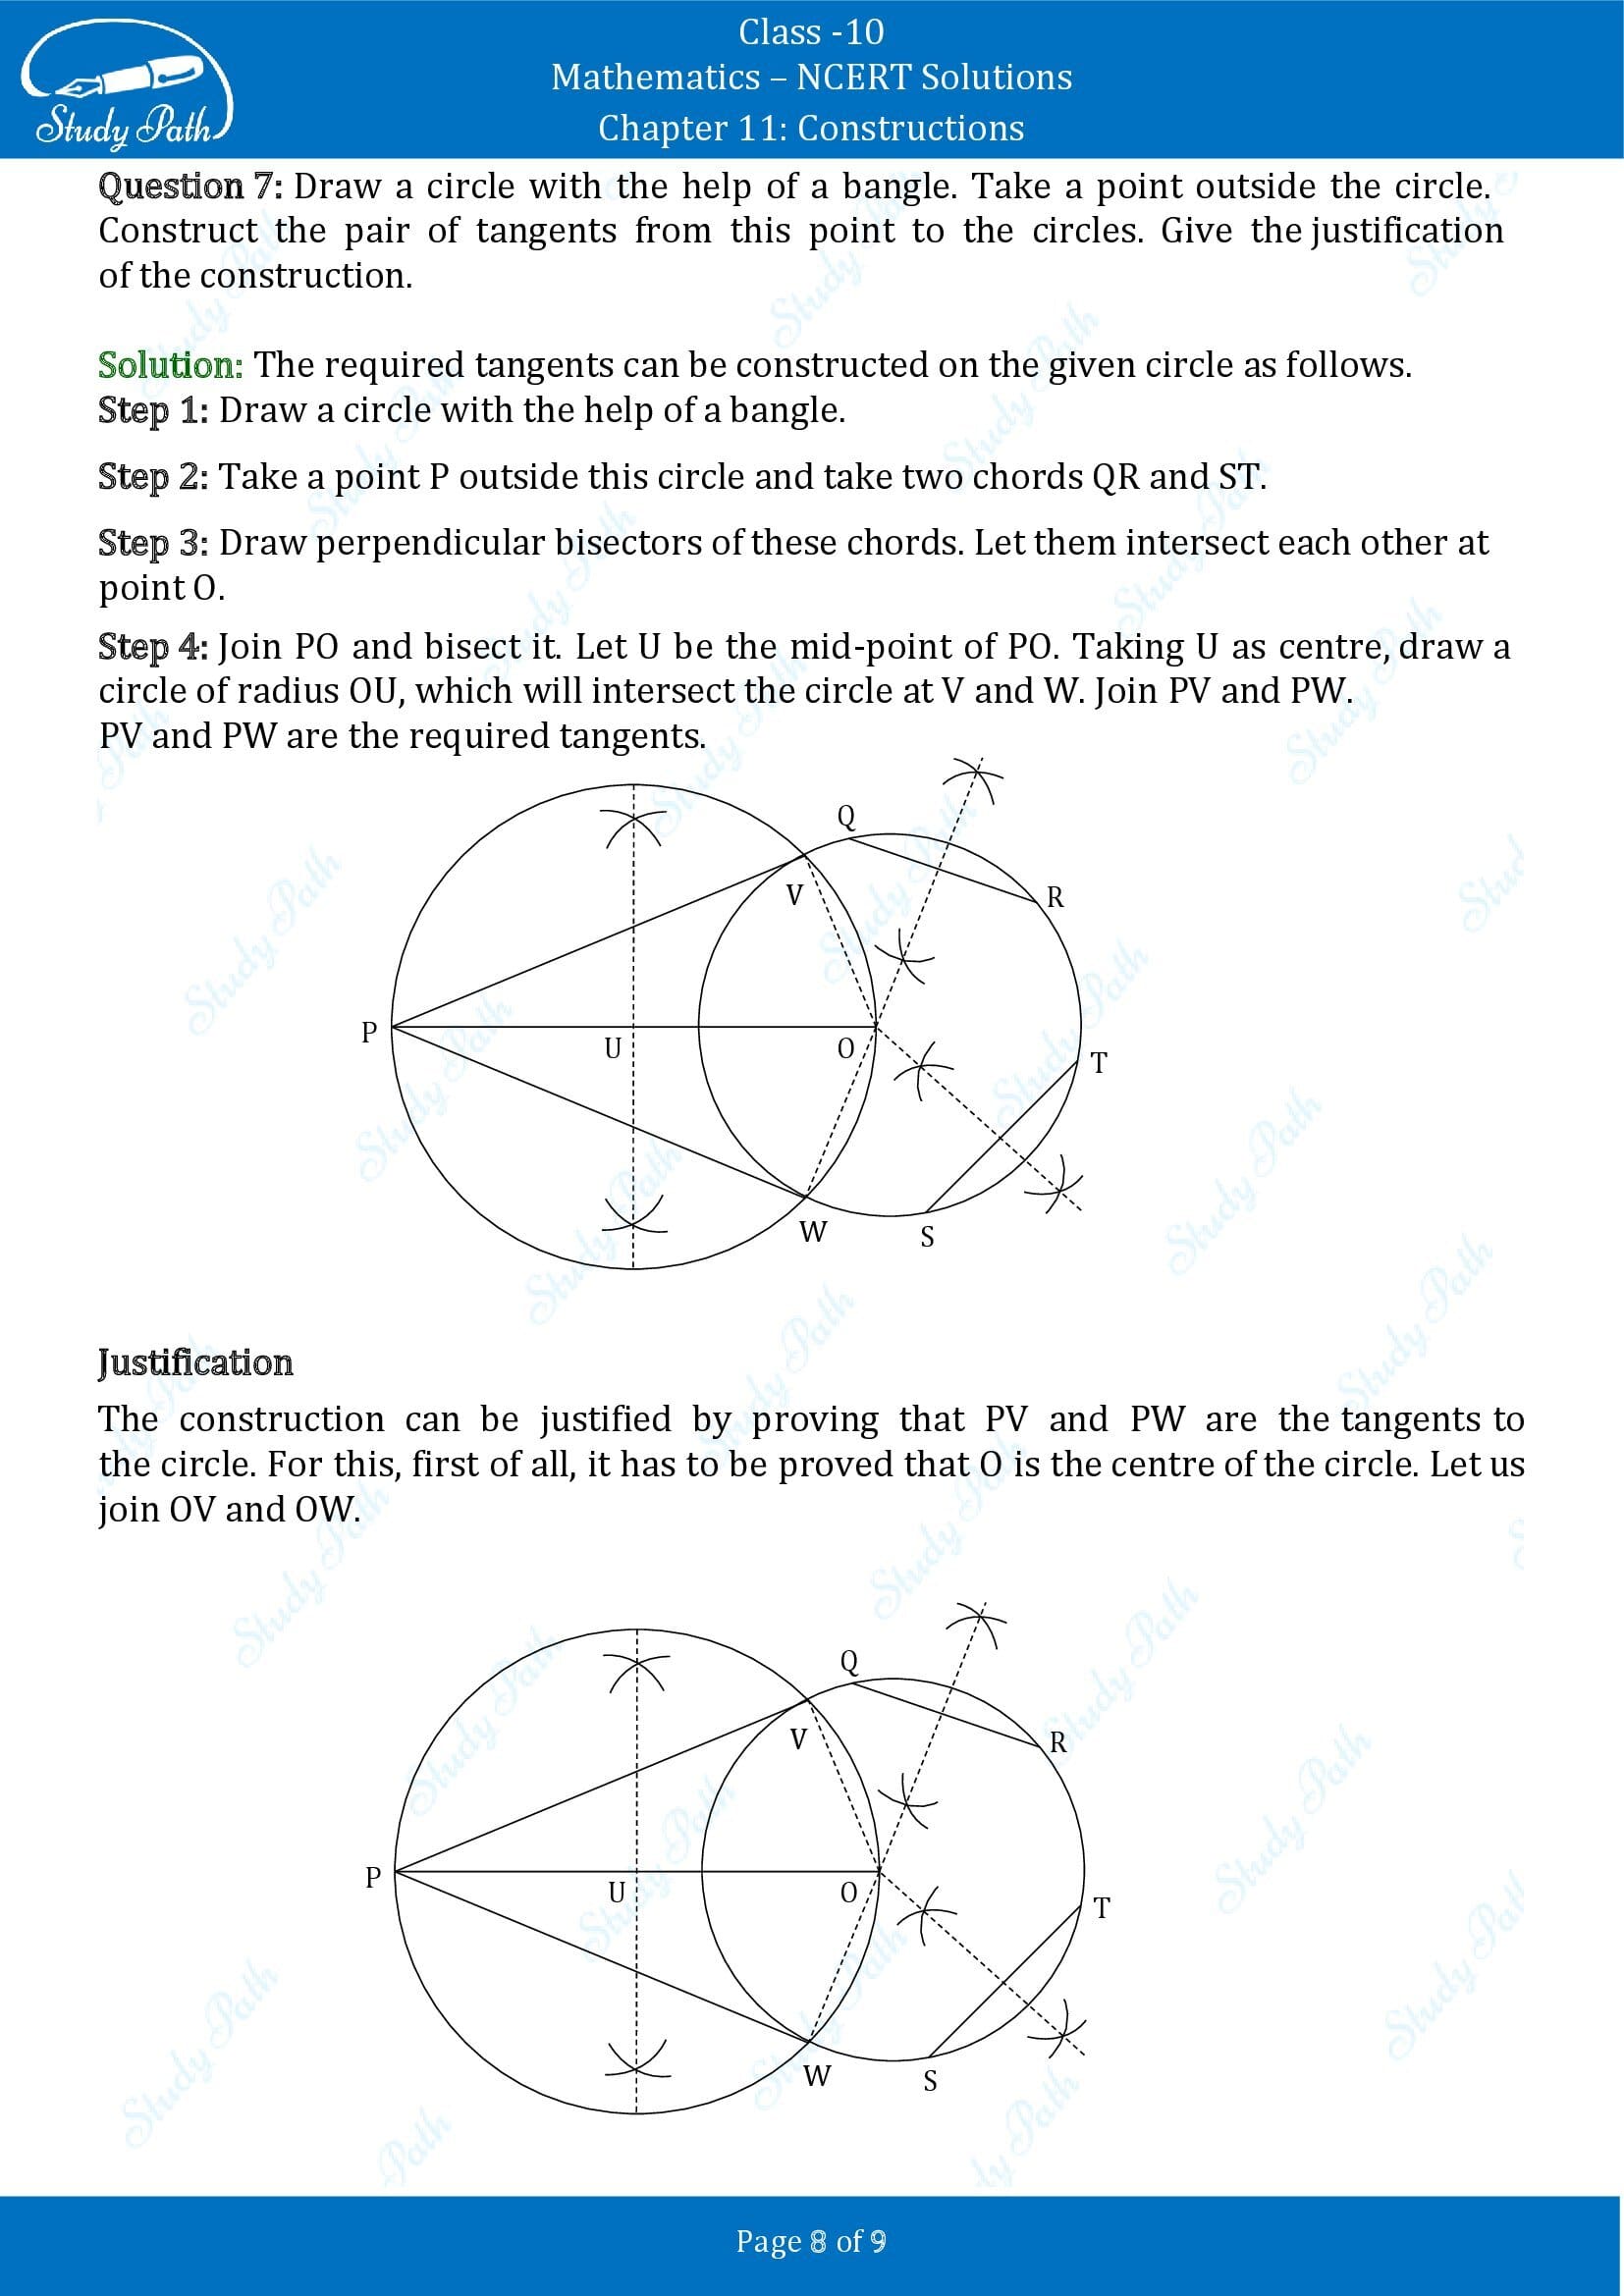 NCERT Solutions for Class 10 Maths Chapter 11 Constructions Exercise 11.2 00008